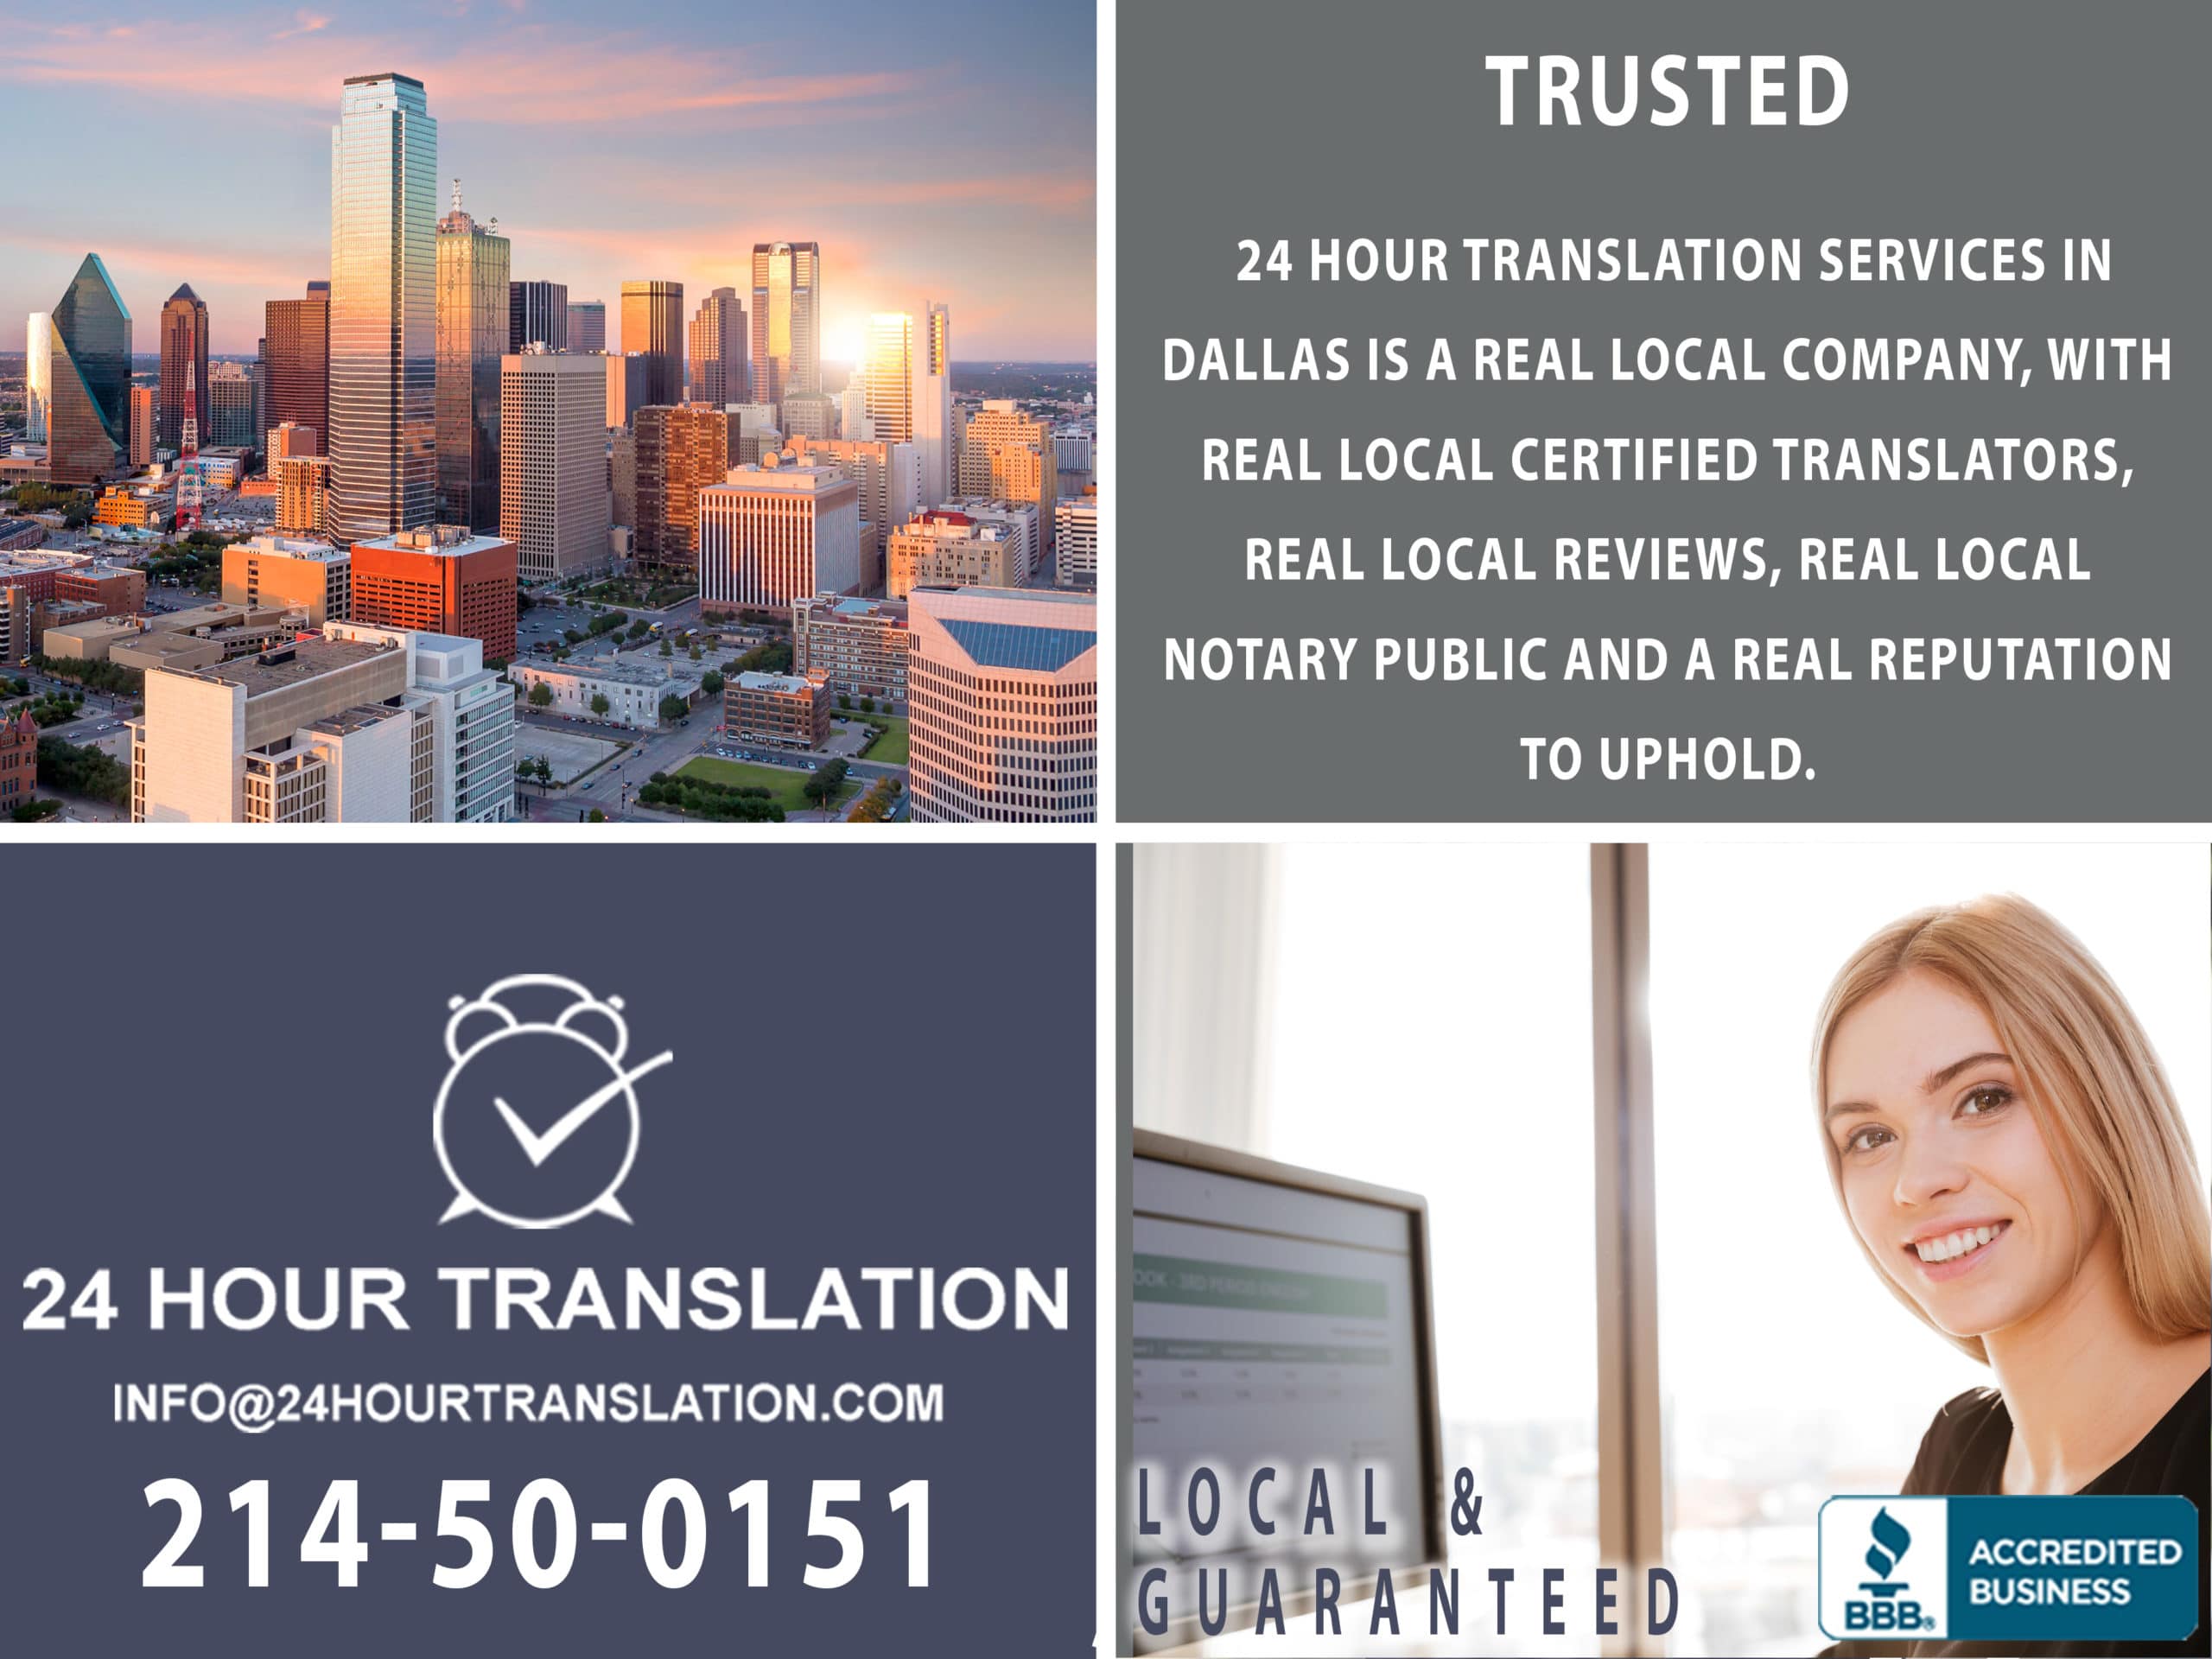 Shopping for translation services near Dallas can be stressful. By doing investigating and asking the right questions, you can get a low-price translation that is linguistically correct, looks professional, and meets legal translation requirements. Always hire a real, local Dallas translation services company. Our office address on Google and Yelp! is staffed! Located near Dallas North Tollway, you can schedule a meeting with our project manager or notary public. We can also quote low price translations on the spot.  Focus on finding a real local Dallas translations agency. Certified translators in Dallas offer better quality, lower prices and guarantees. They also offer quick solutions to meet your changing needs and are most likely to be honest and supply transparent pricing.     Once you have found a real local certified Dallas translation service, choose one that is experienced.   We have been in business for 16 years, have successfully translated tens of thousands of legal, medical, immigration, academic, technical, financial, and training documents.  When you need Spanish, Portuguese, French, Arabic, or any other language translated in Dallas, we have the linguistic talent to produce certified and notarized translations that are guaranteed.   Call 214-550-0151 to learn why we are the best choice to translate documents near Carrolton, Irving, Arlington, Plano, Richardson, Mesquite, Grand Prairie, Lewisville and Denton.